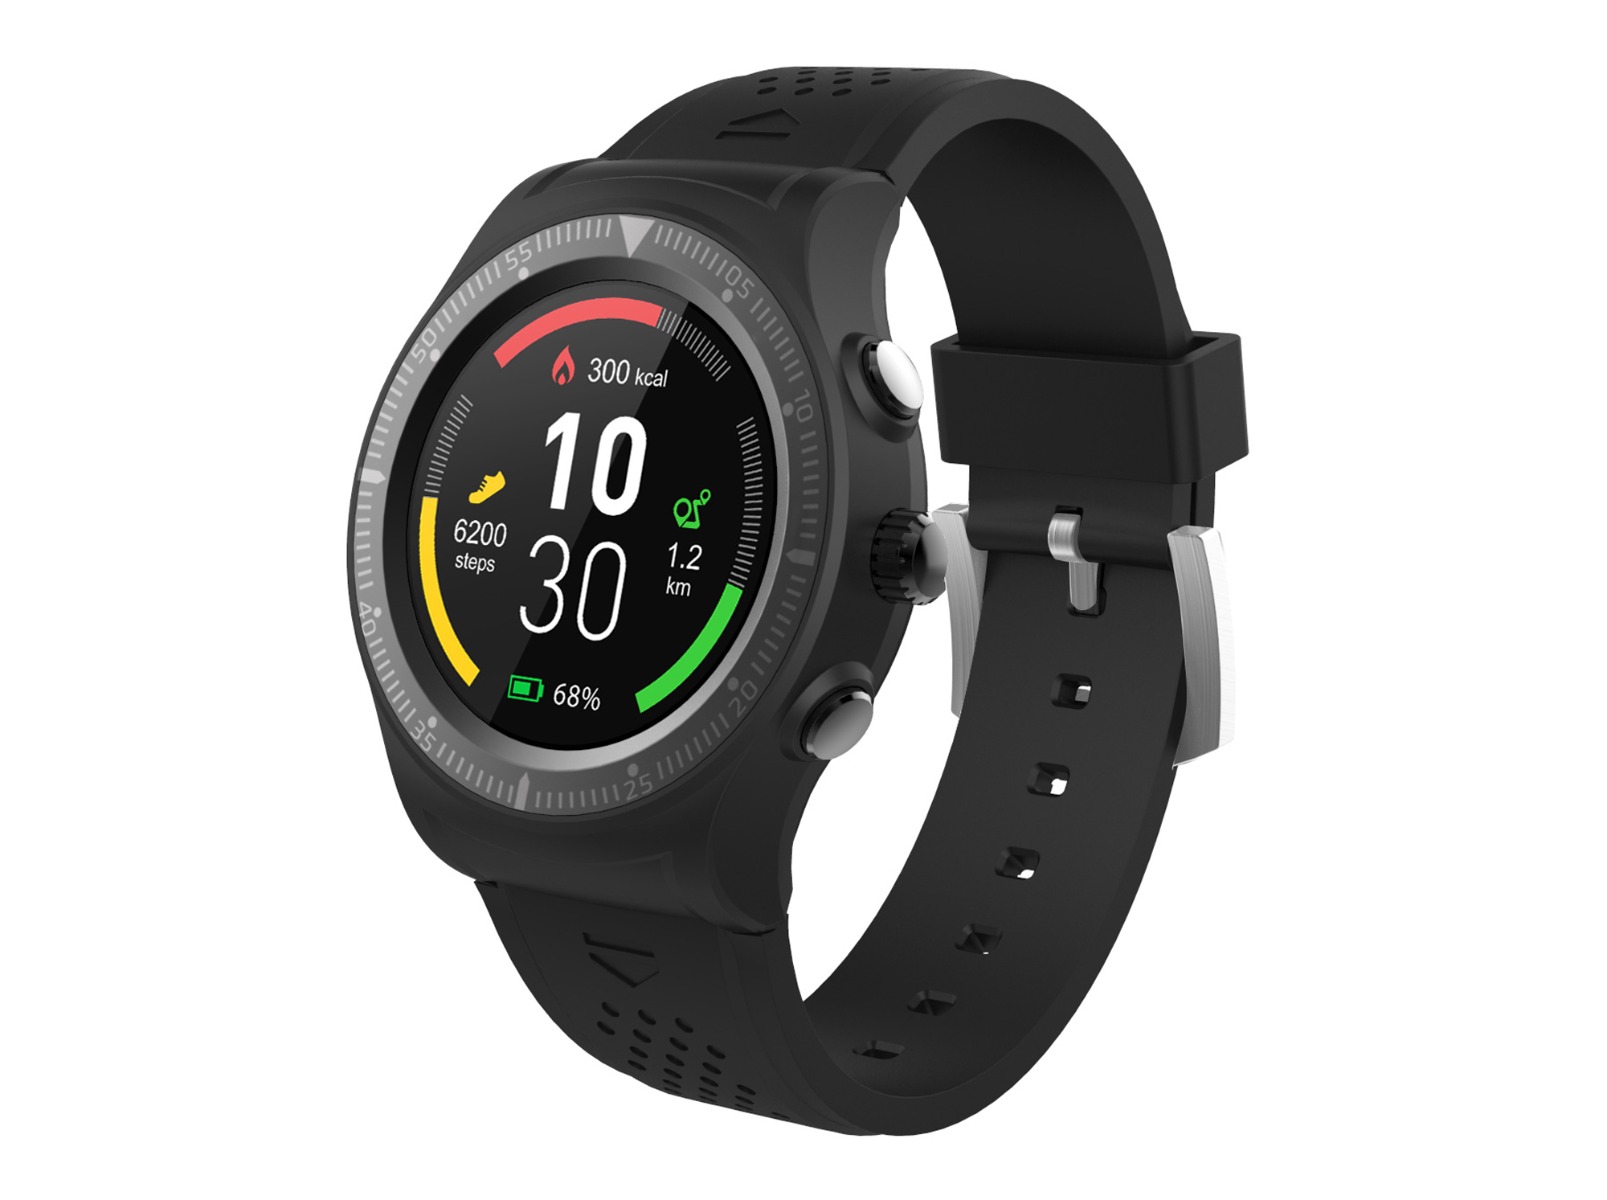 Smartwatch Overmax Touch 5.0 Black